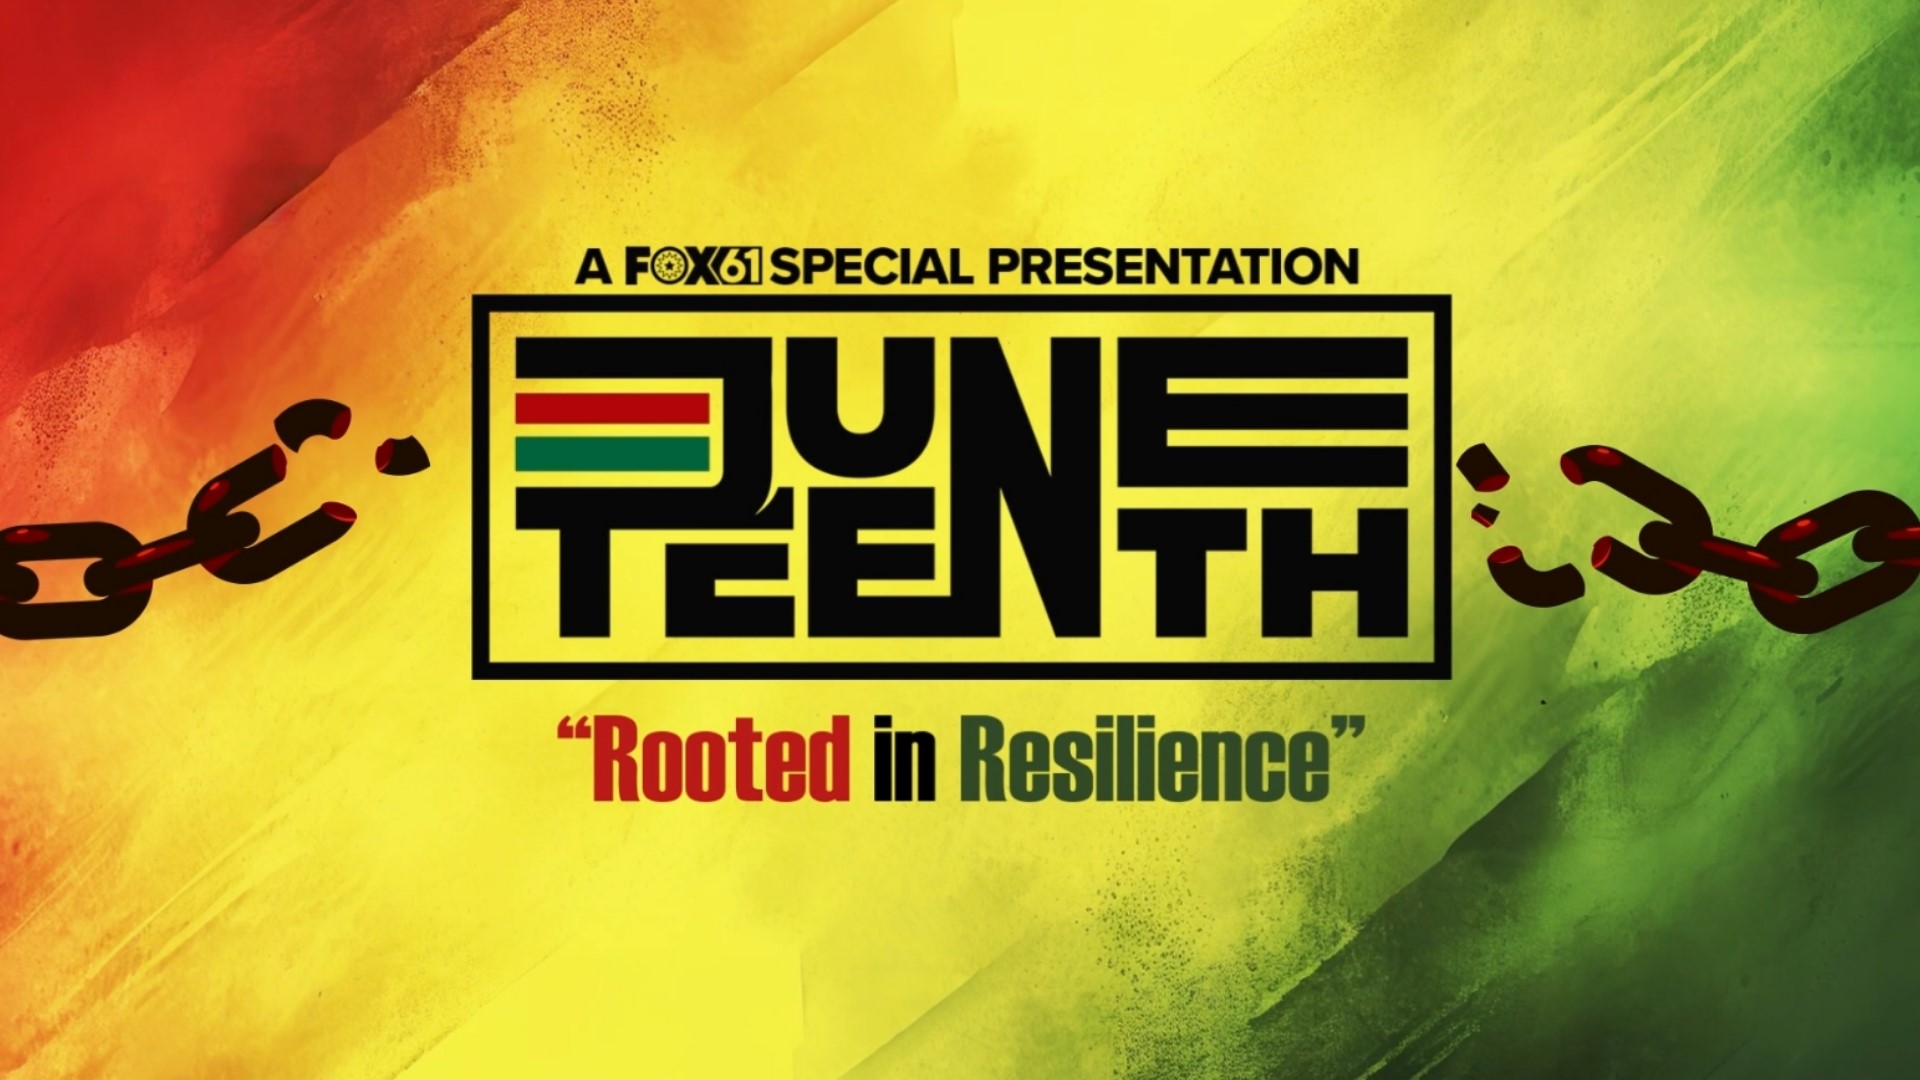 FOX61 explains the significance of Juneteenth, now a federal holiday, and highlights Connecticut's Black history in "Rooted in Resilience"